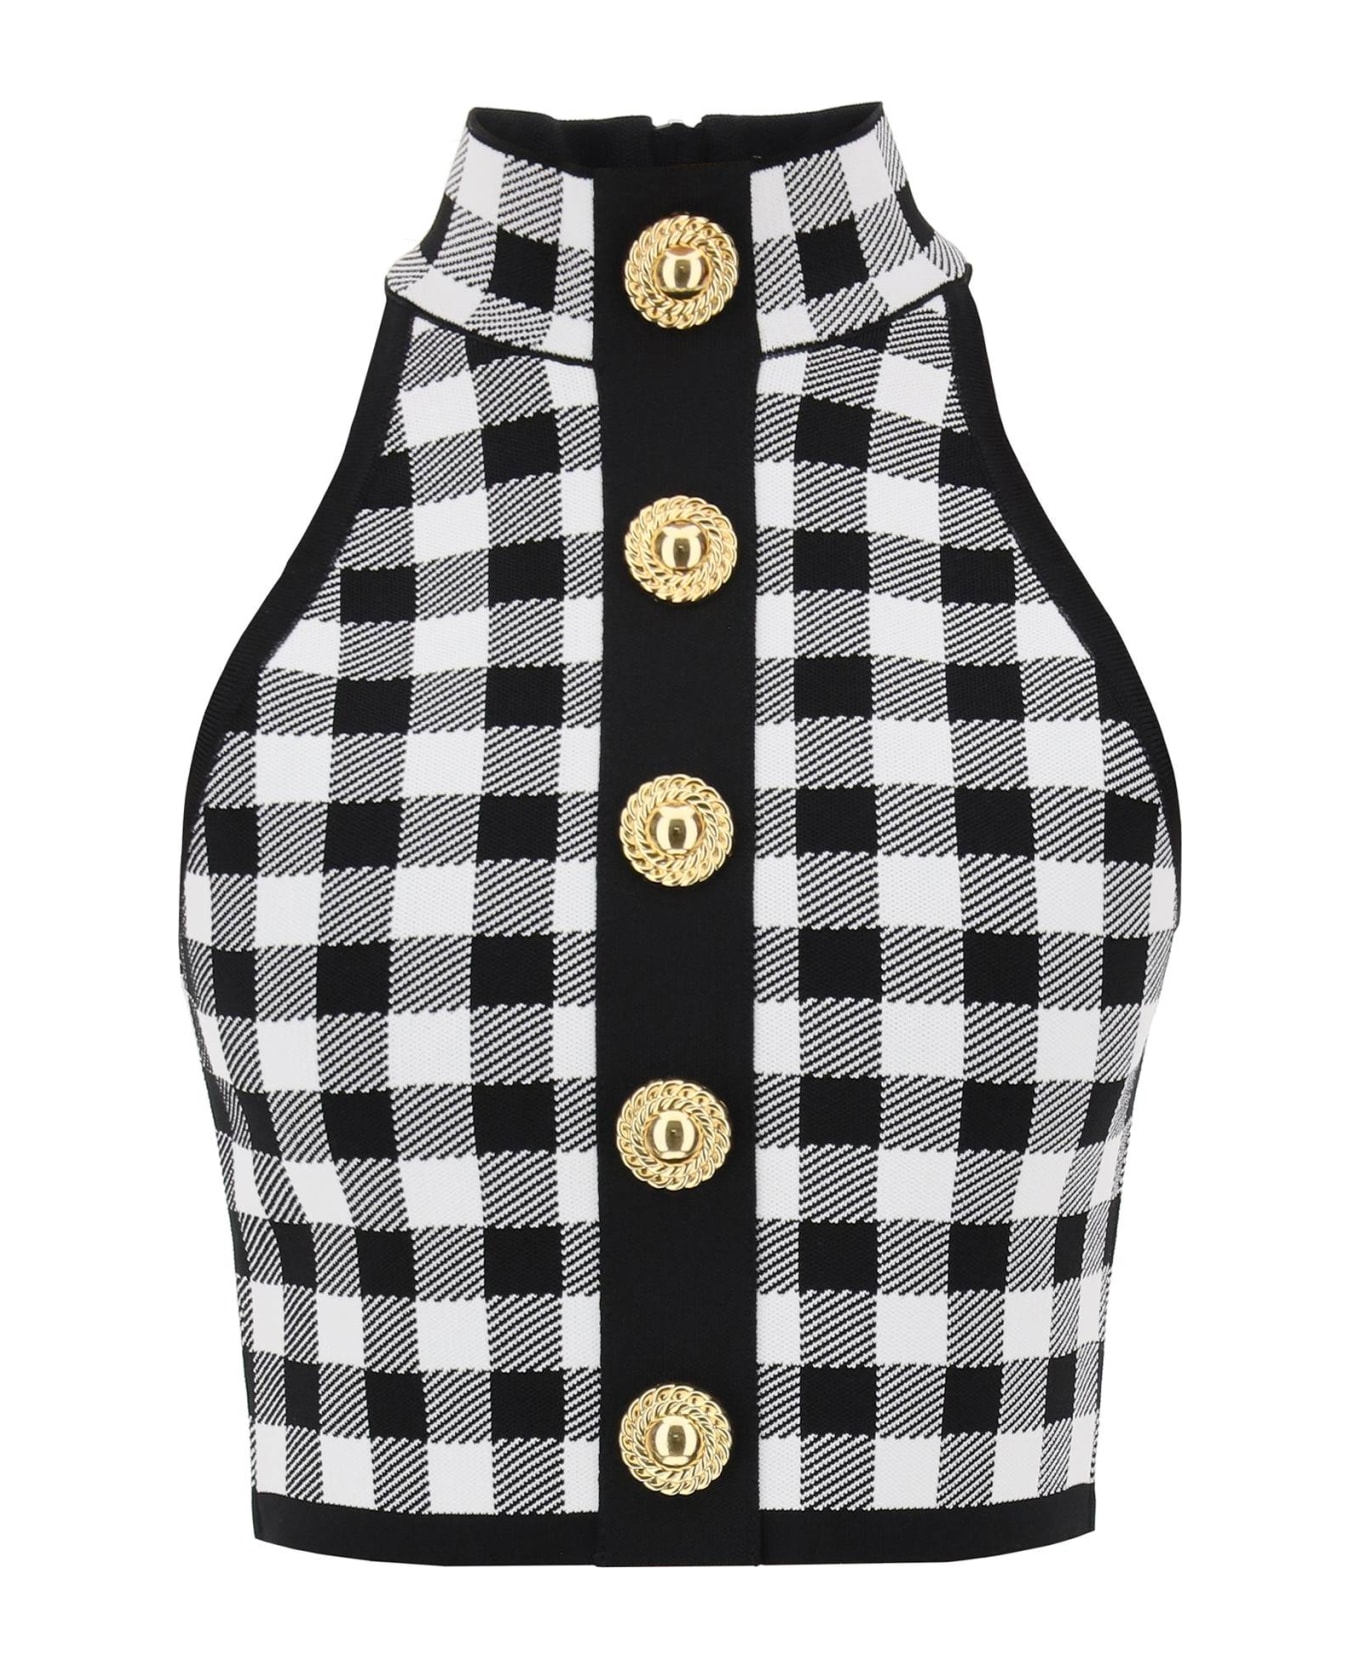 Balmain Gingham Knit Cropped Top With Embossed Buttons - Noir/blanc